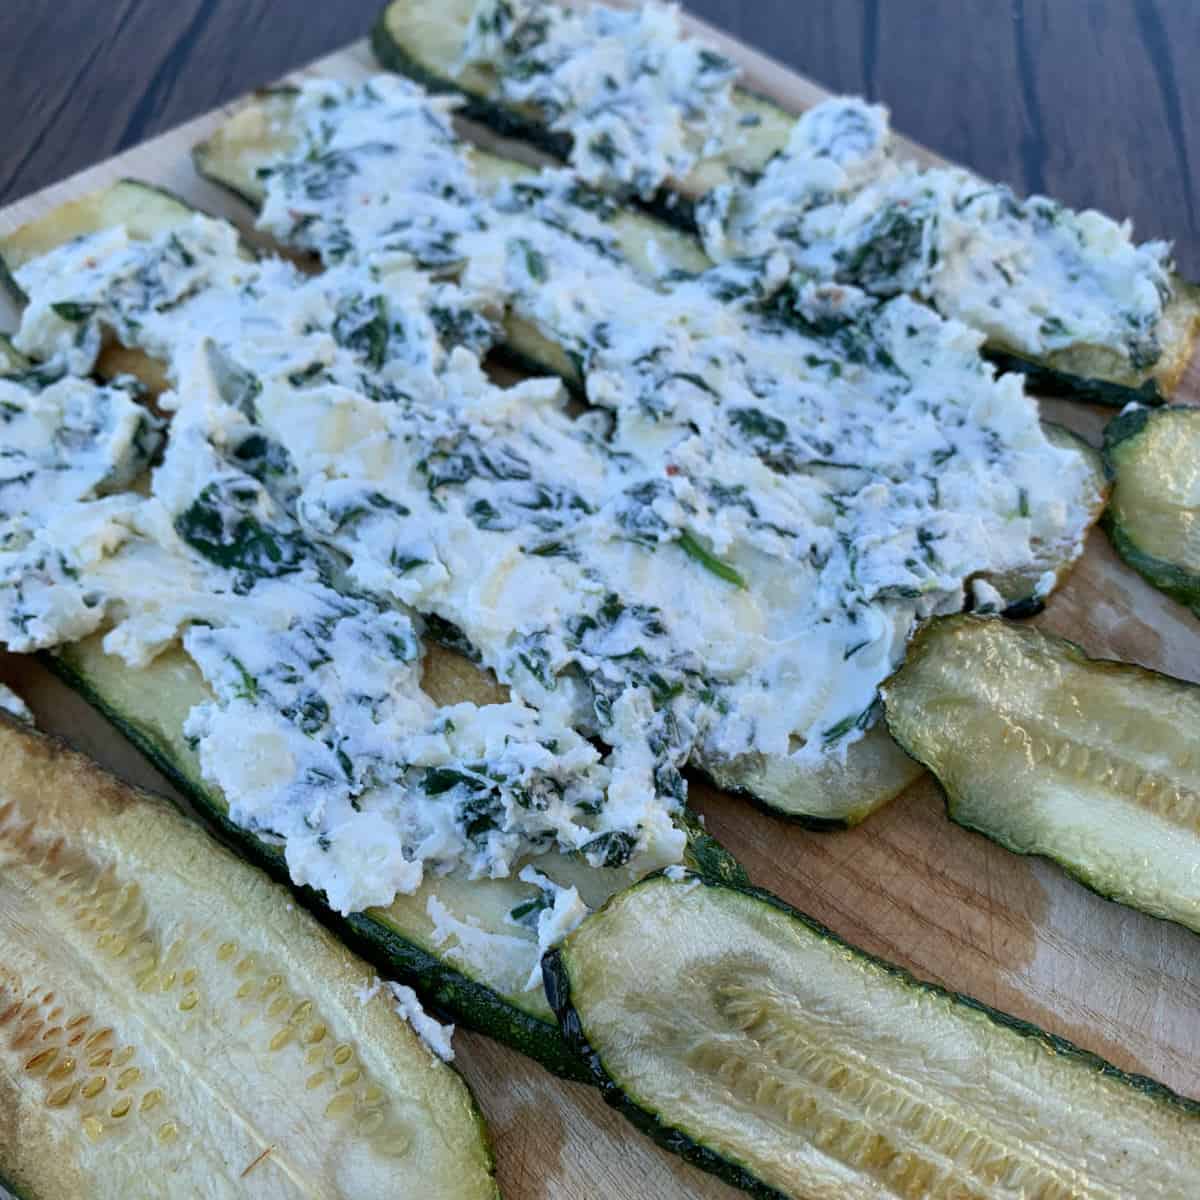 Spinach ricotta cheese filling spread on fried zucchini.